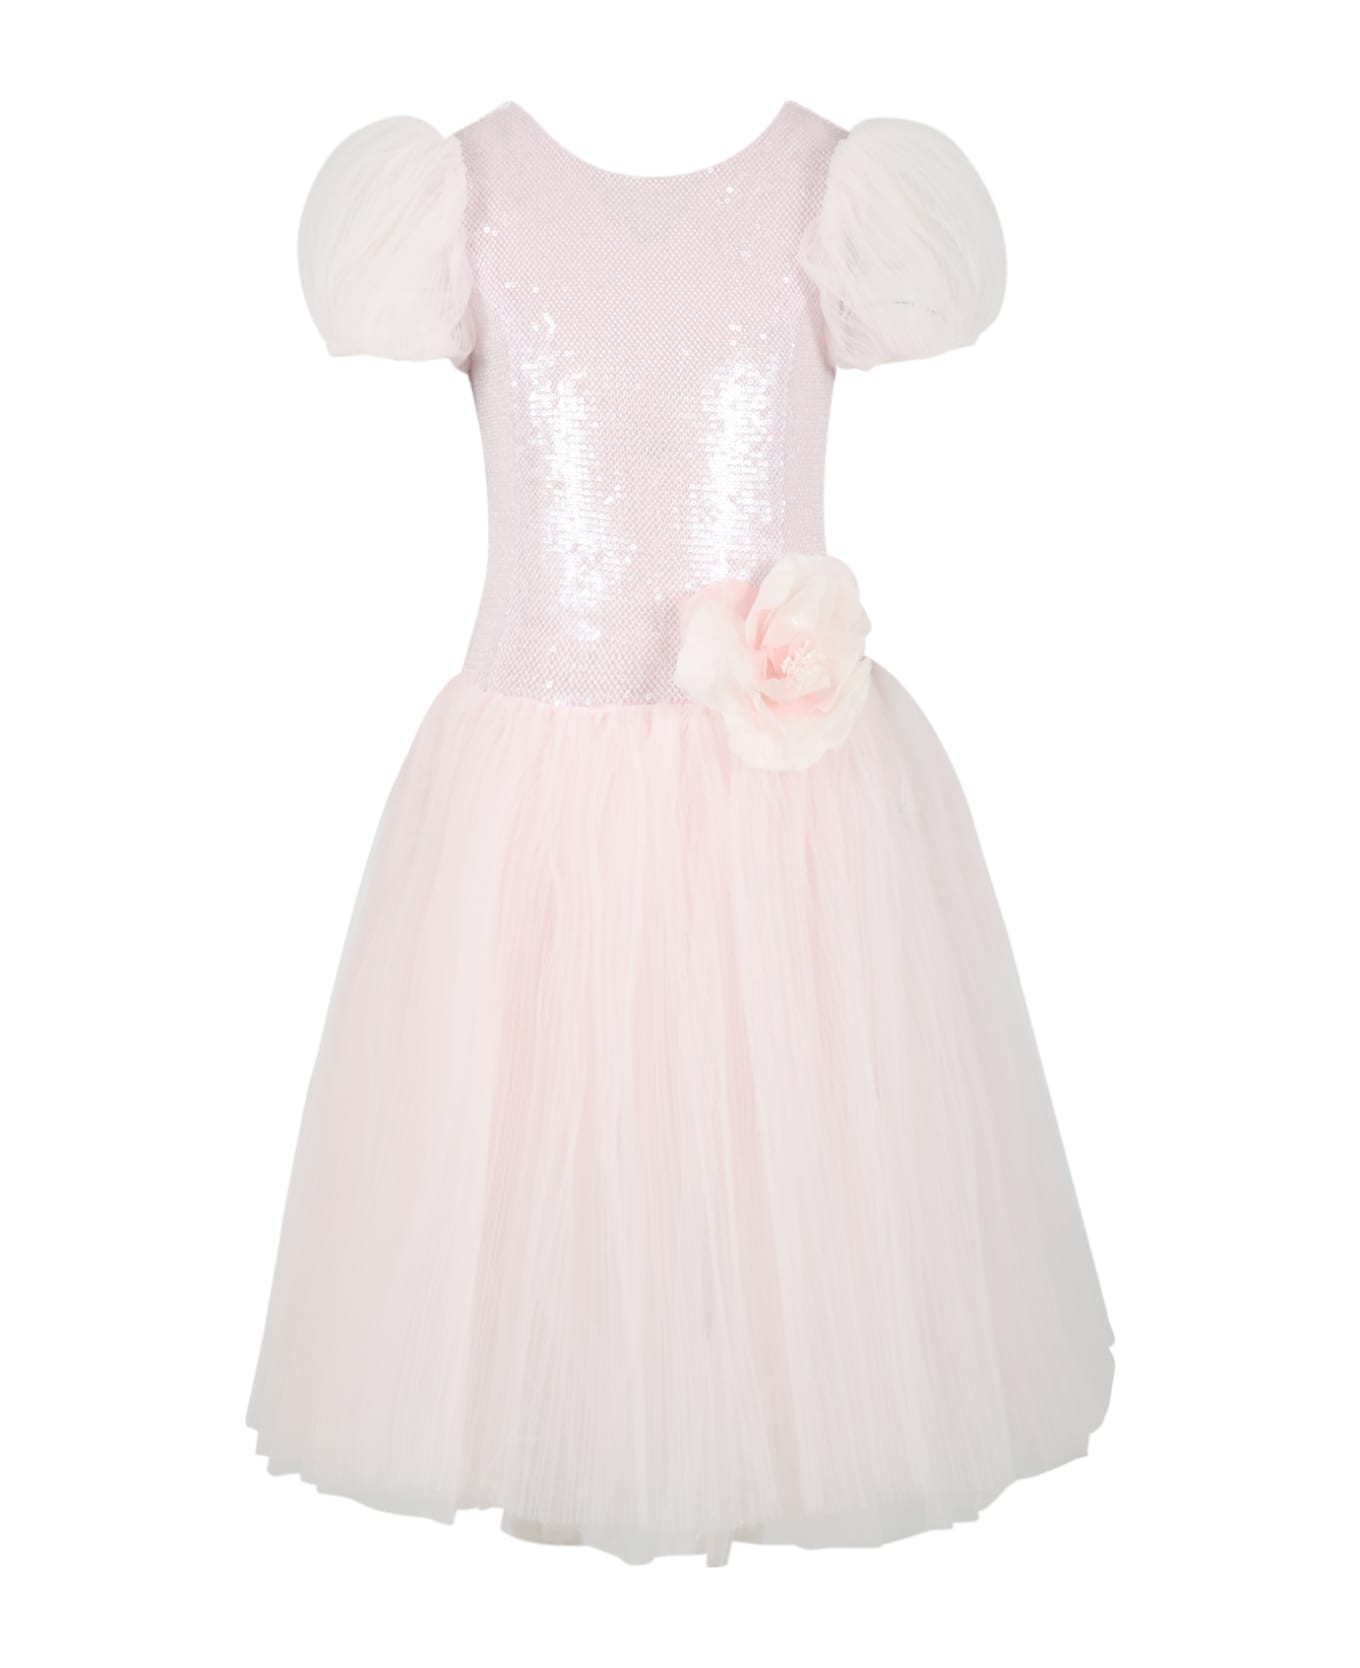 Monnalisa Pink Dress For Girl With Flowers - Pink